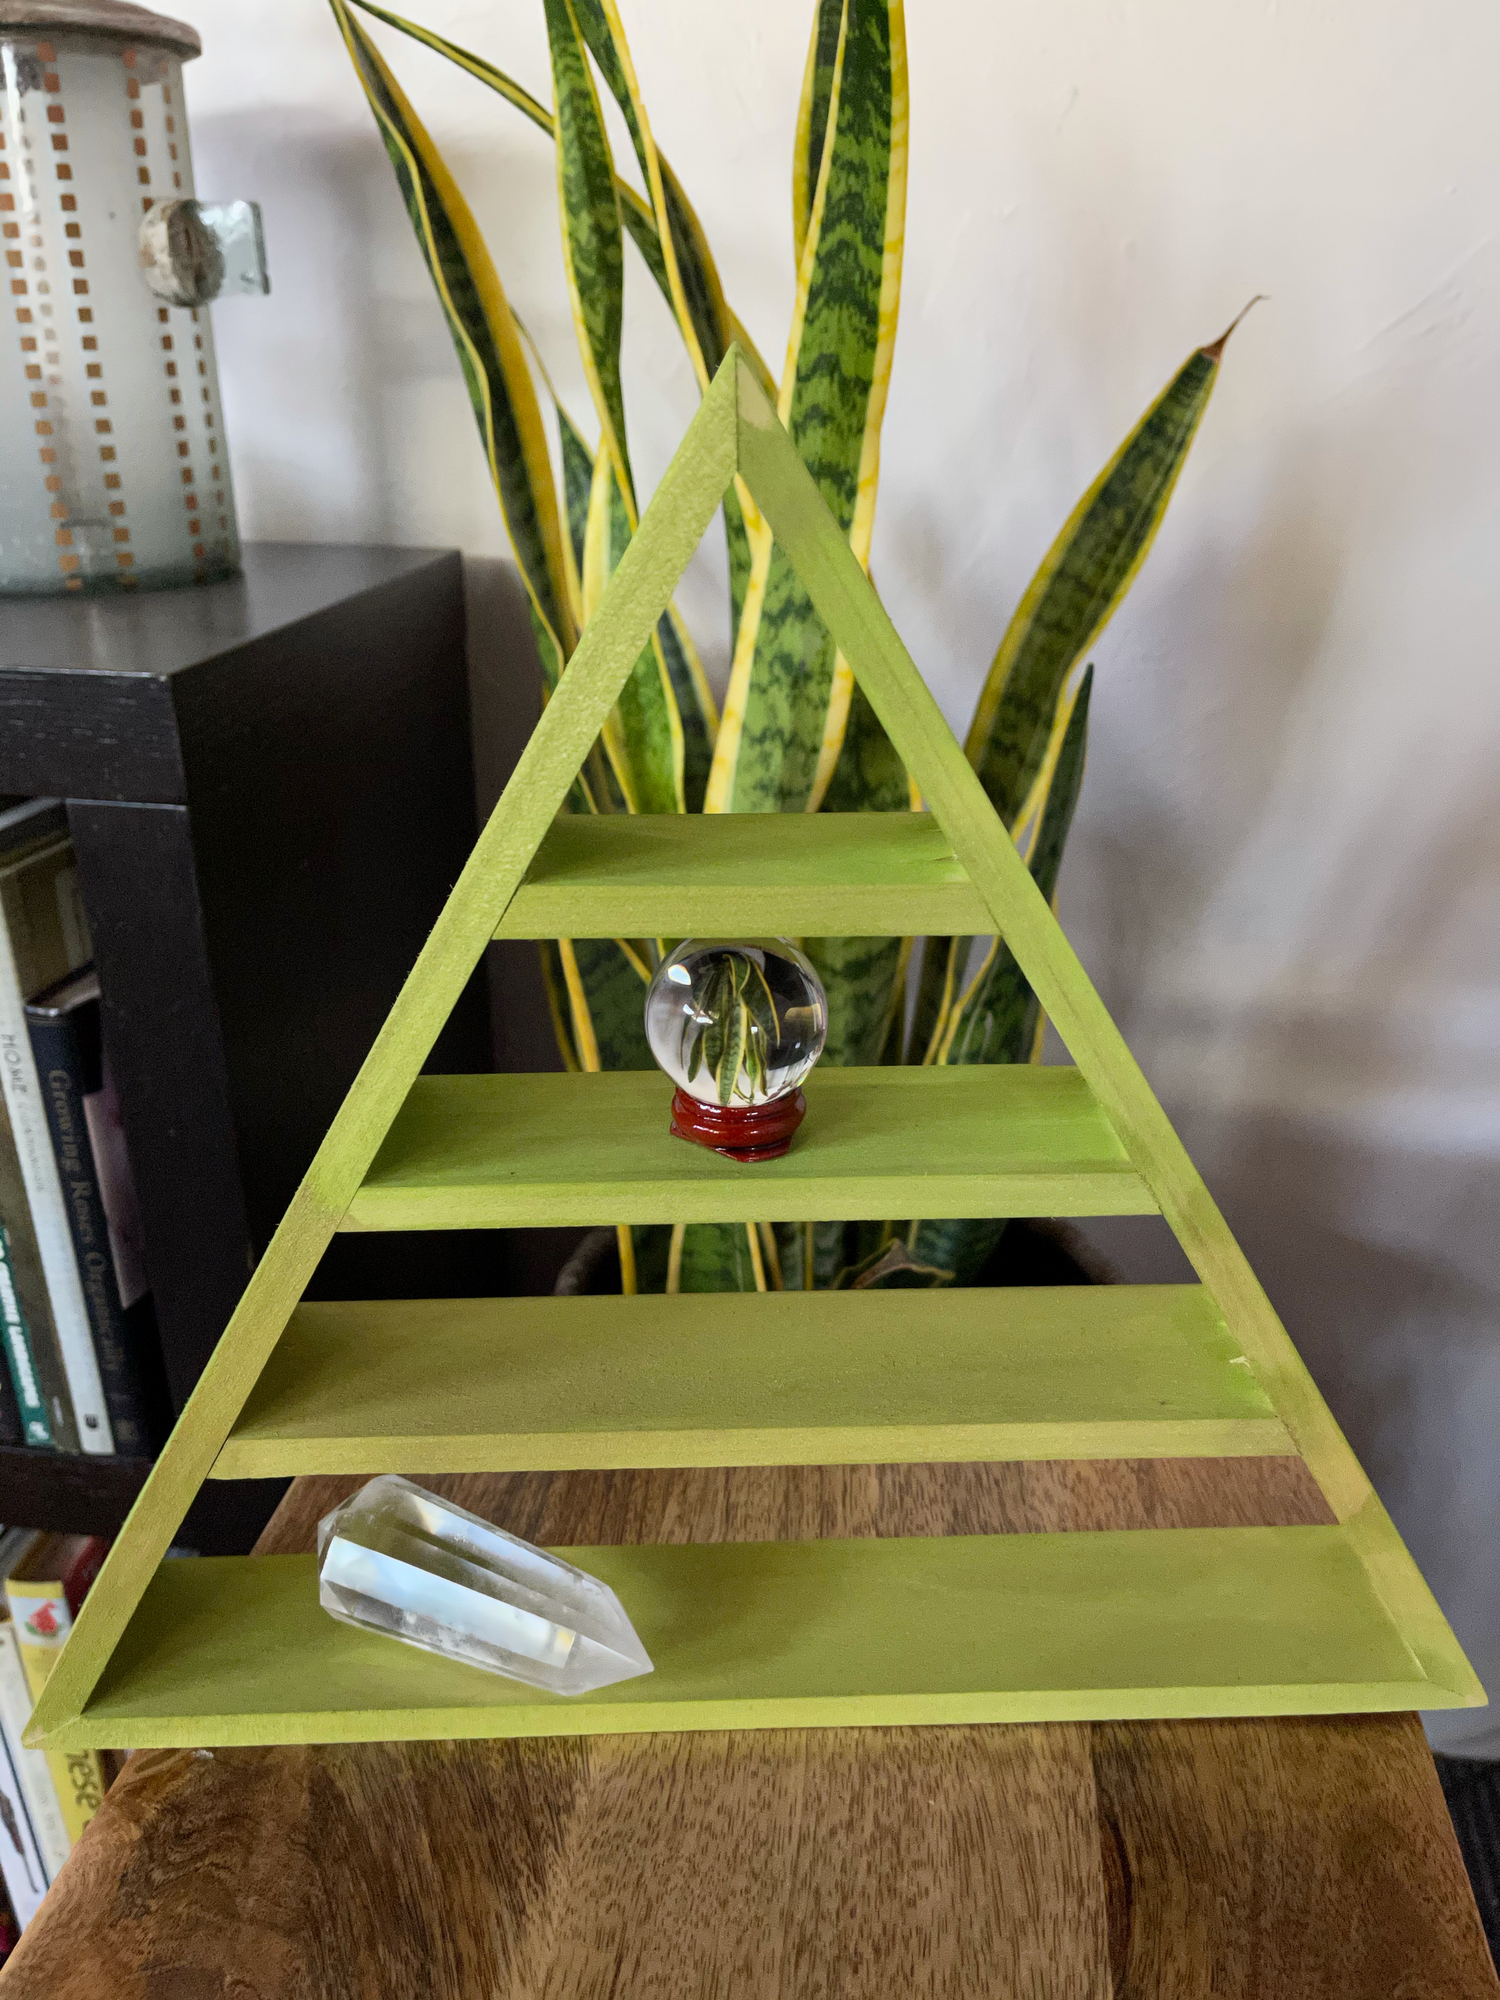 Green Witch Triangle Shelf, Verdi Wash, Hand Crafted Poplar Triangle Shelf, Heavy Triangle Shelf, Lots of Shelves for Crystal Display, Altar